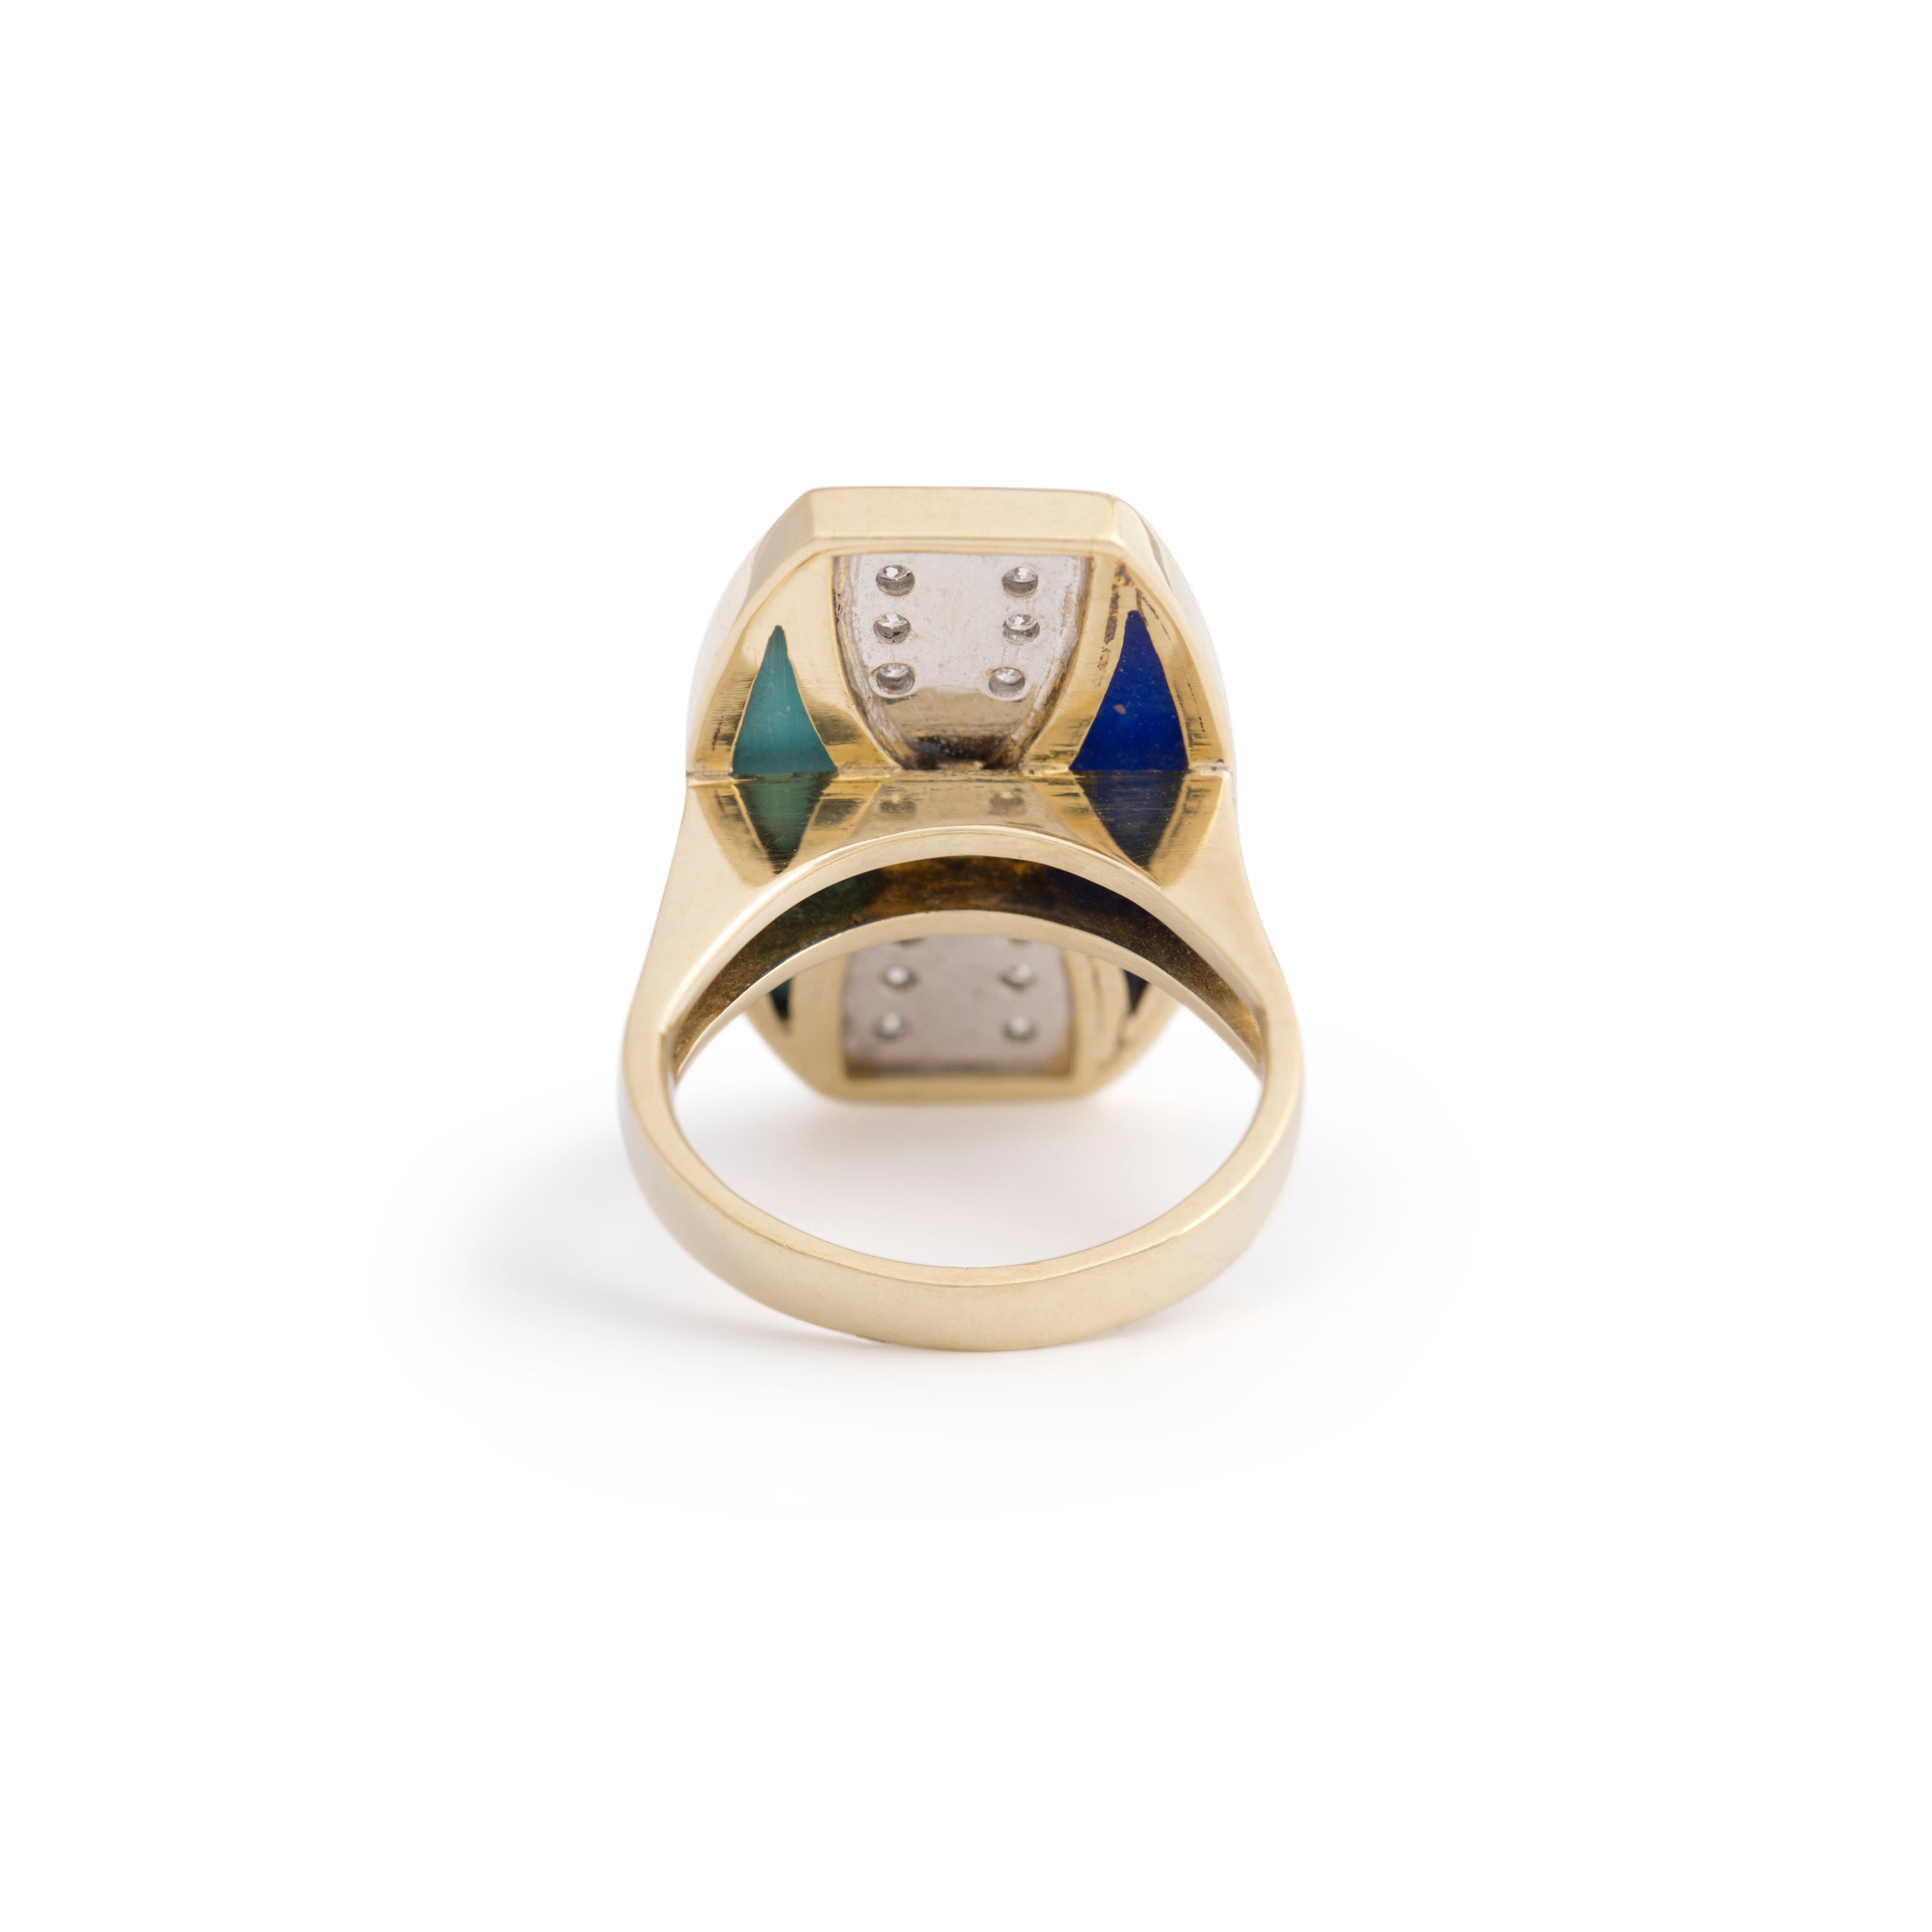 Modernist Lapis, Turquoise, and Diamond 14K Gold Ring